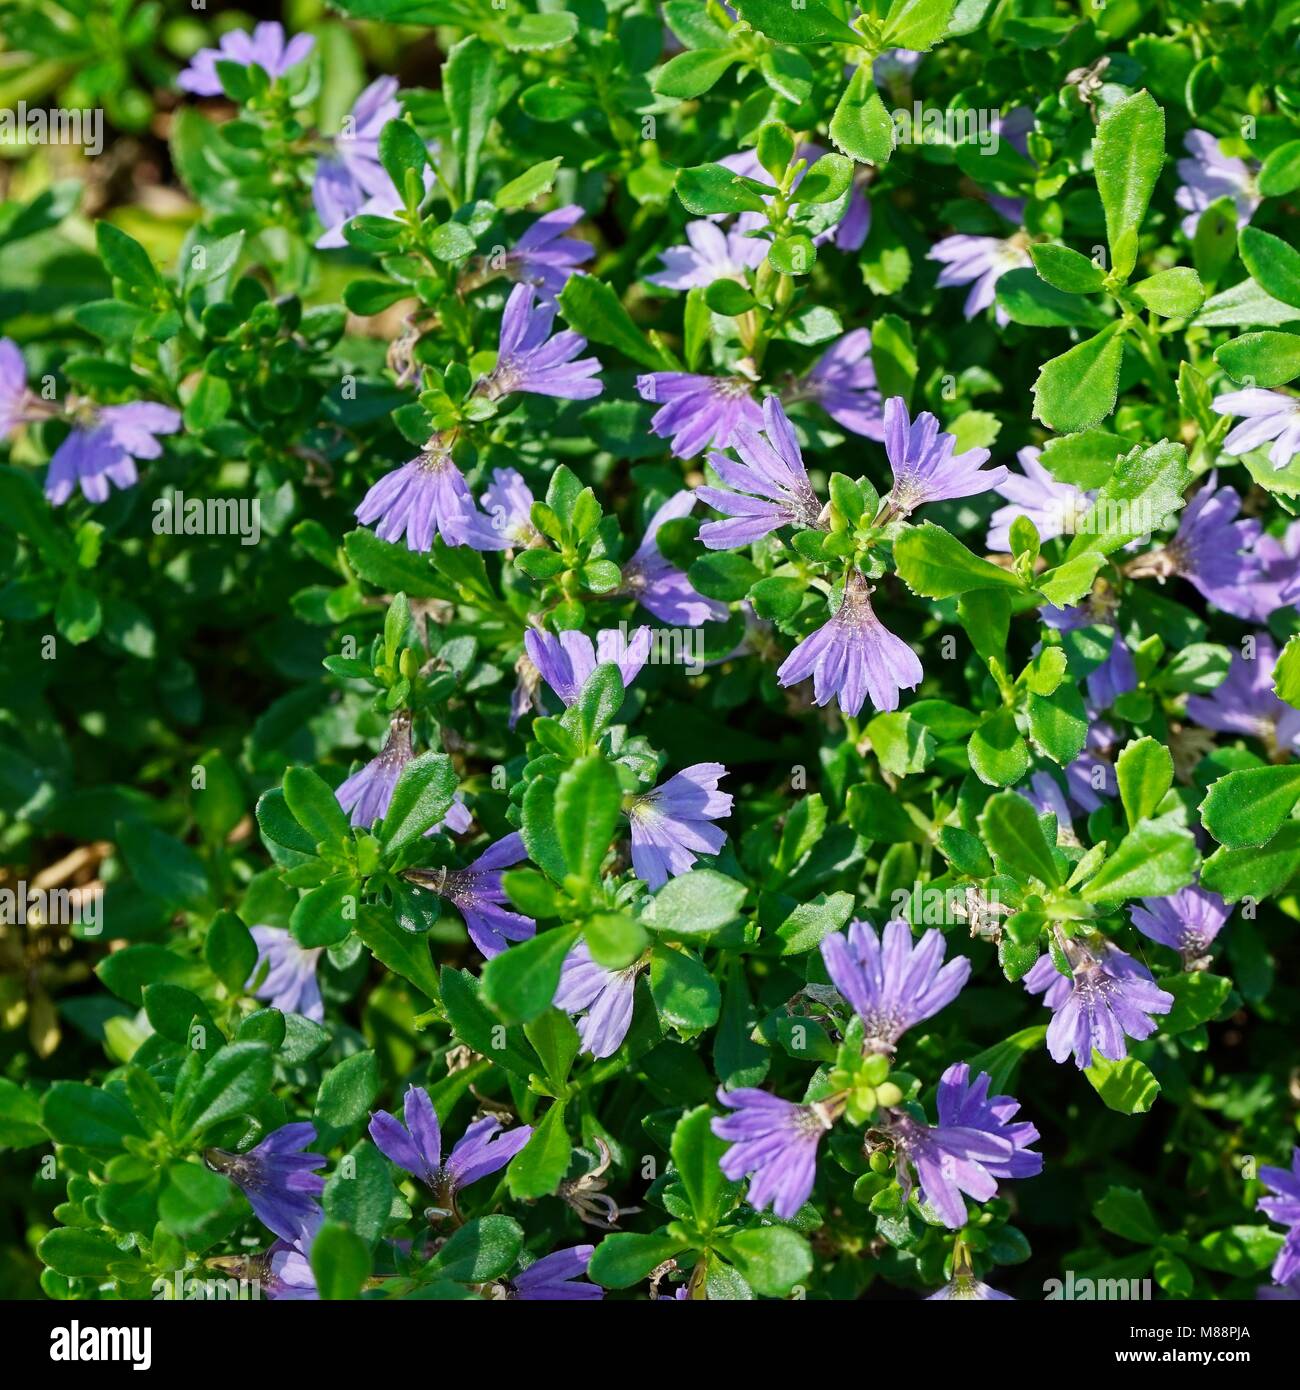 Scaevola flowers, small and mauve, on a low spreading groundcover plant. Stock Photo